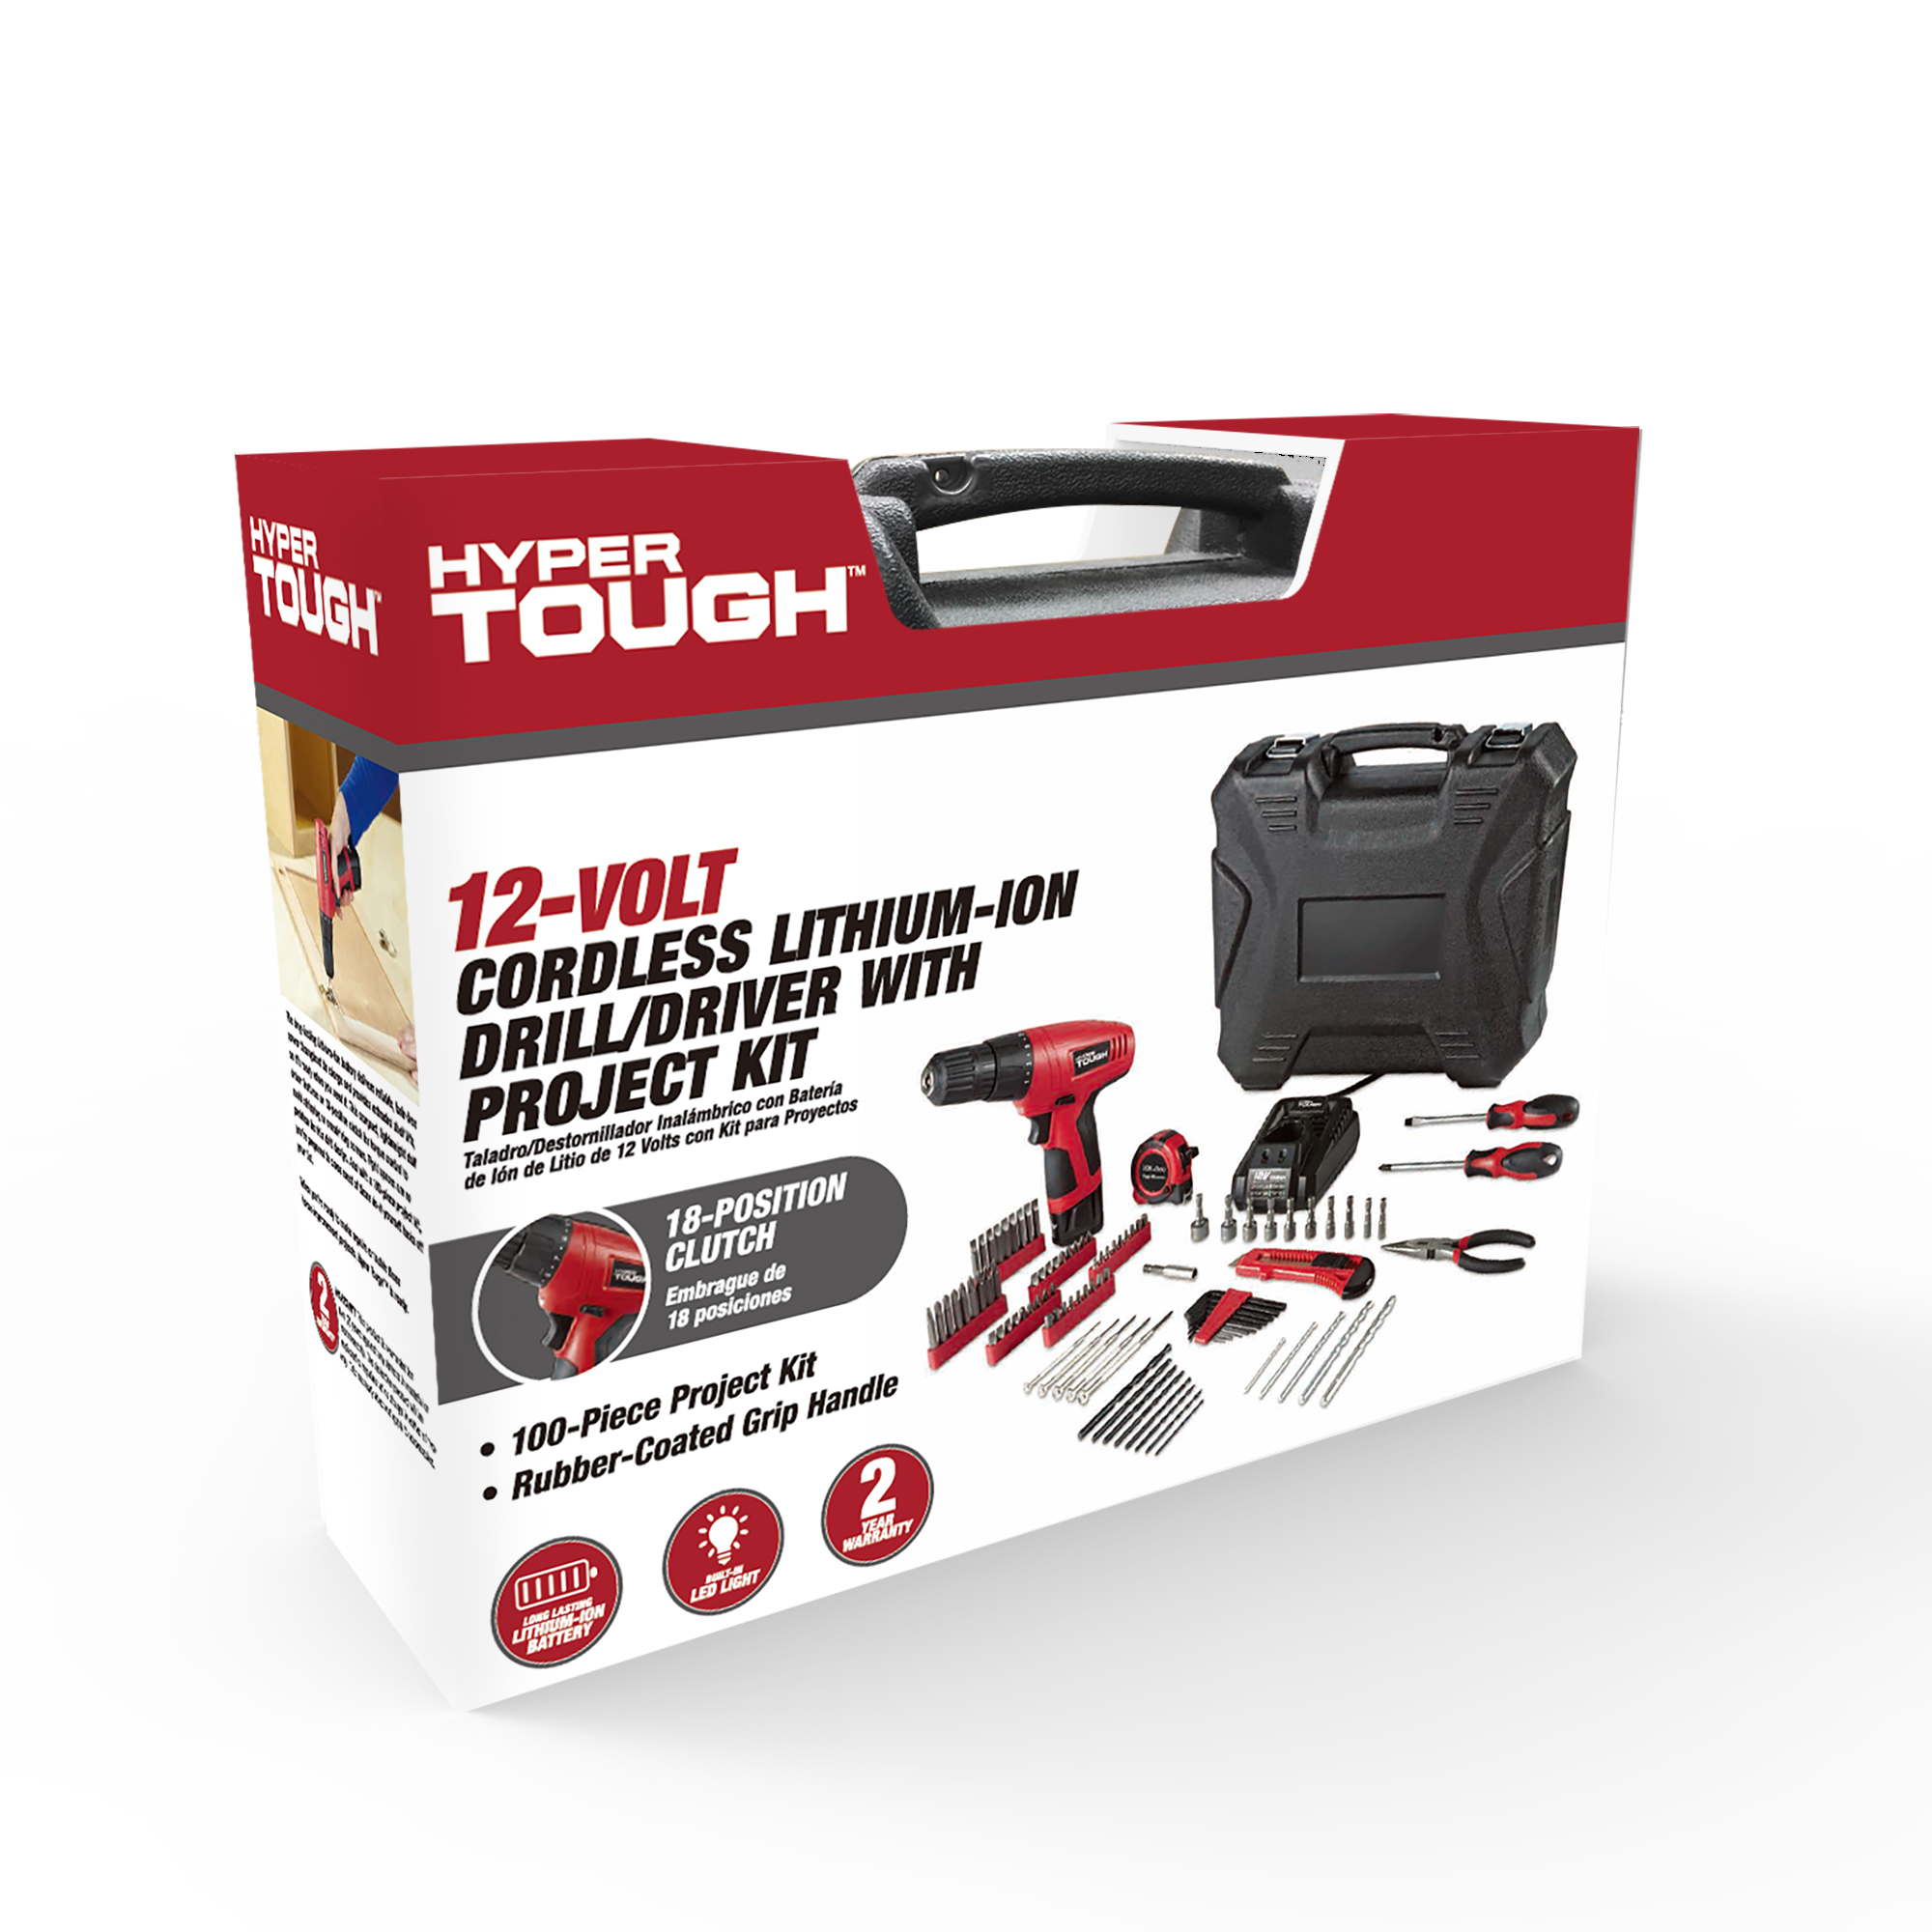 Hyper Tough 5241.41 12V Cordless Drill with 100 Piece Project Kit - image 5 of 5